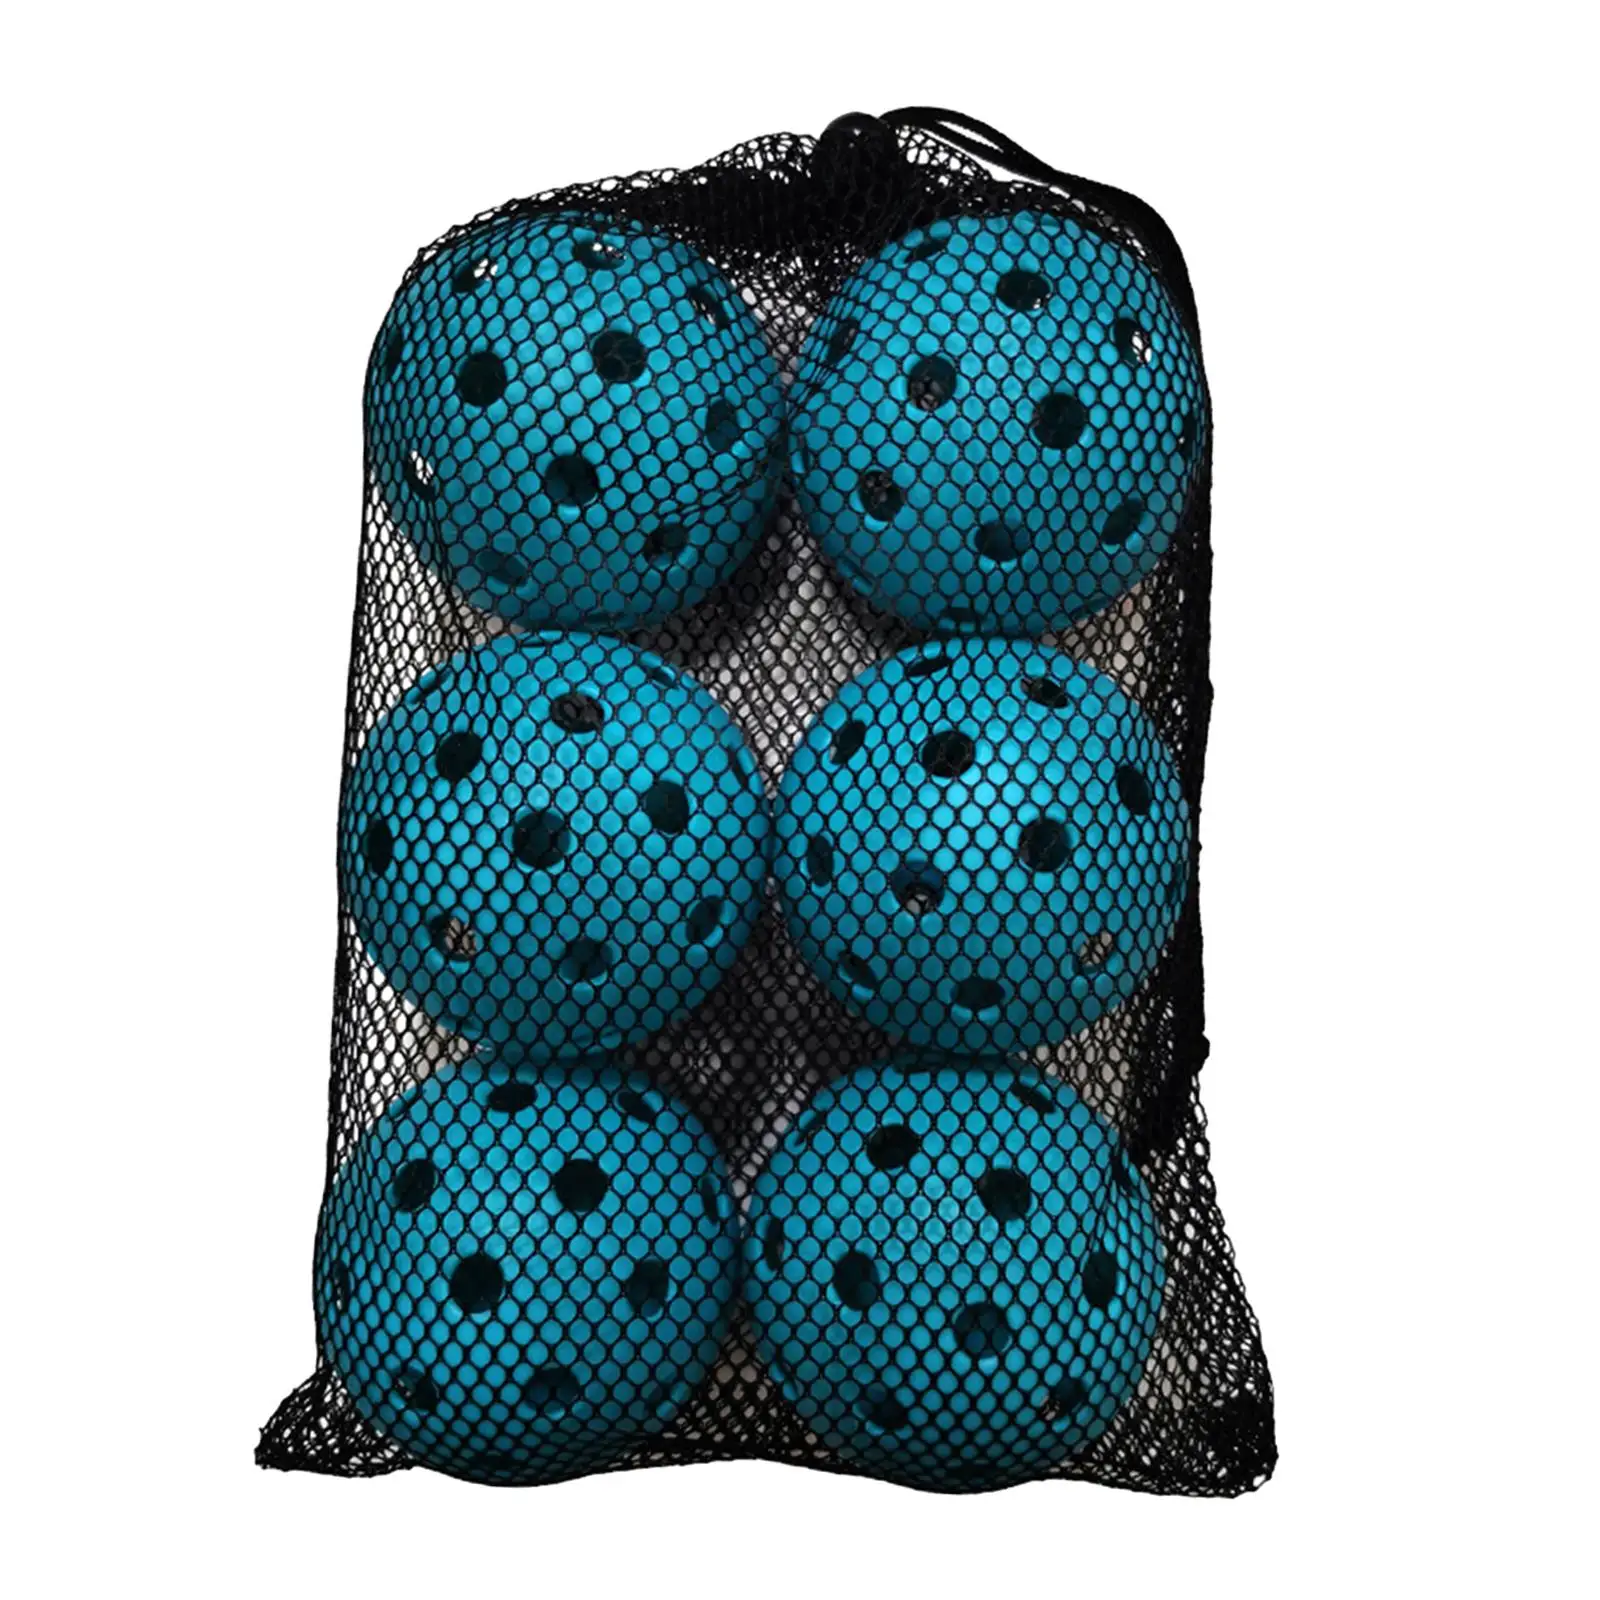 6x Pickleball Balls Hollow Ball for Outdoor Courts Training Tournament Play